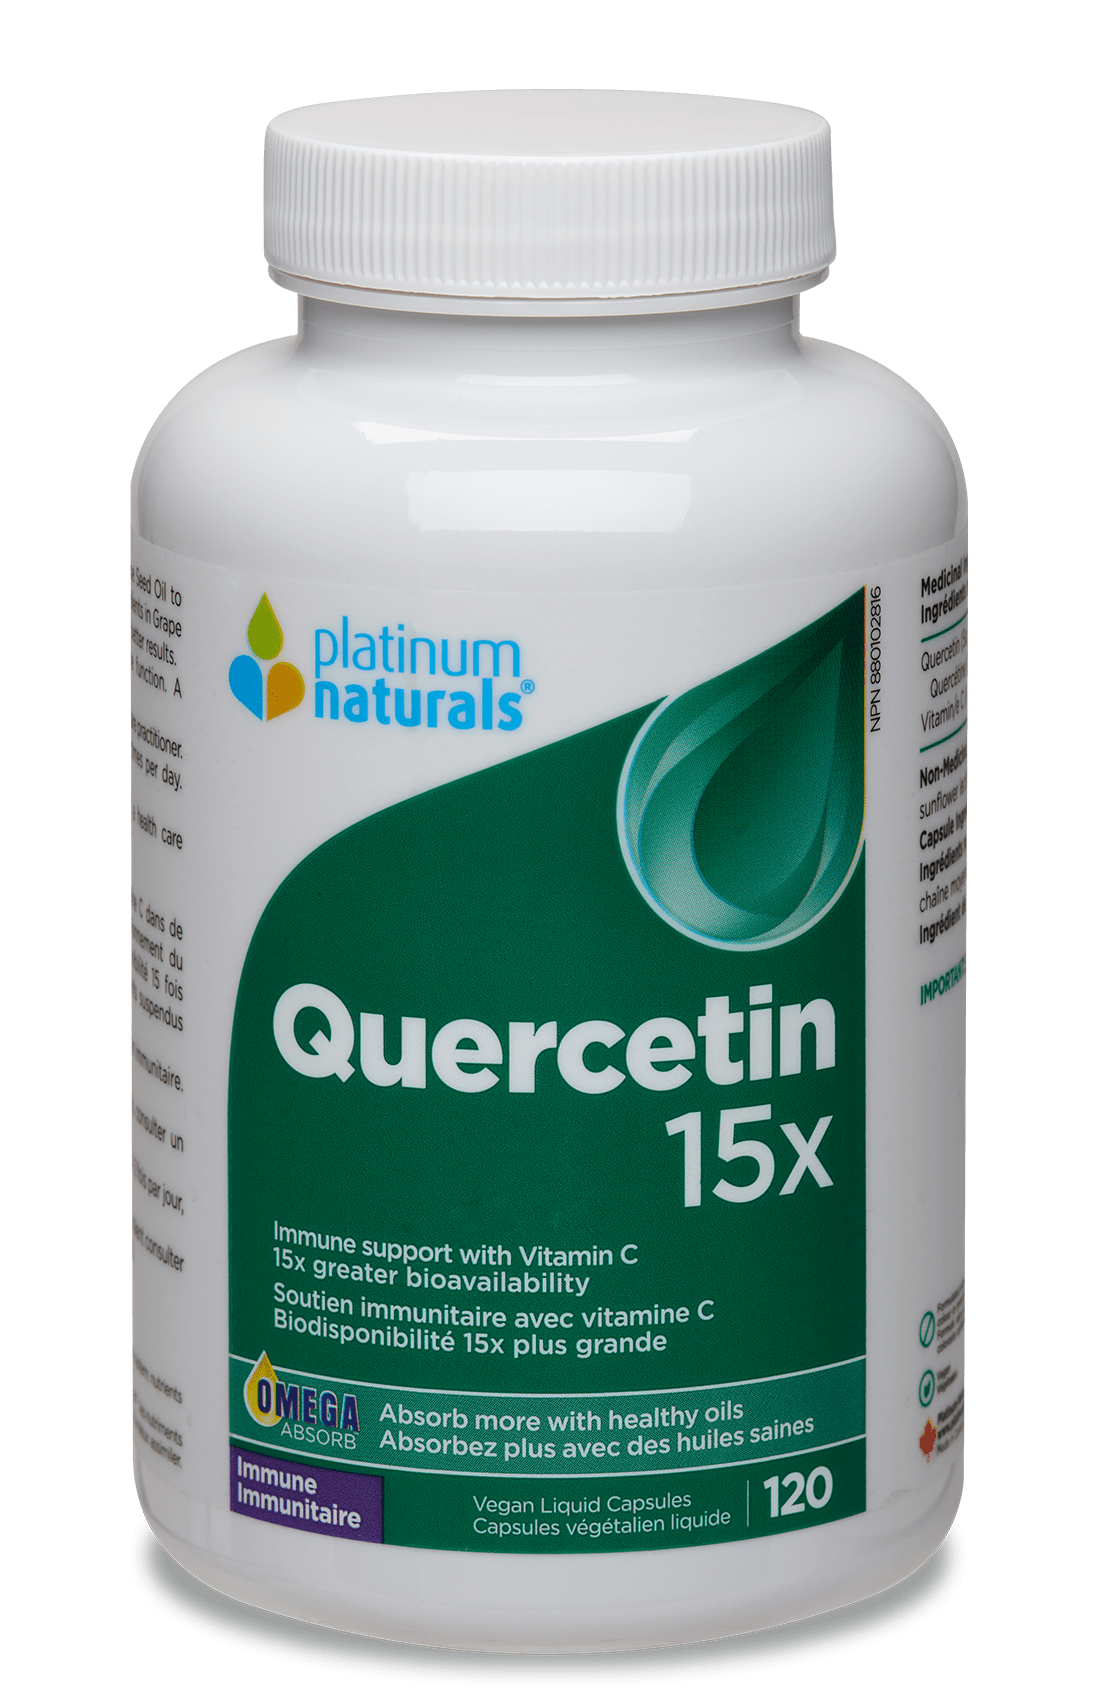 Quercetin and energy boost